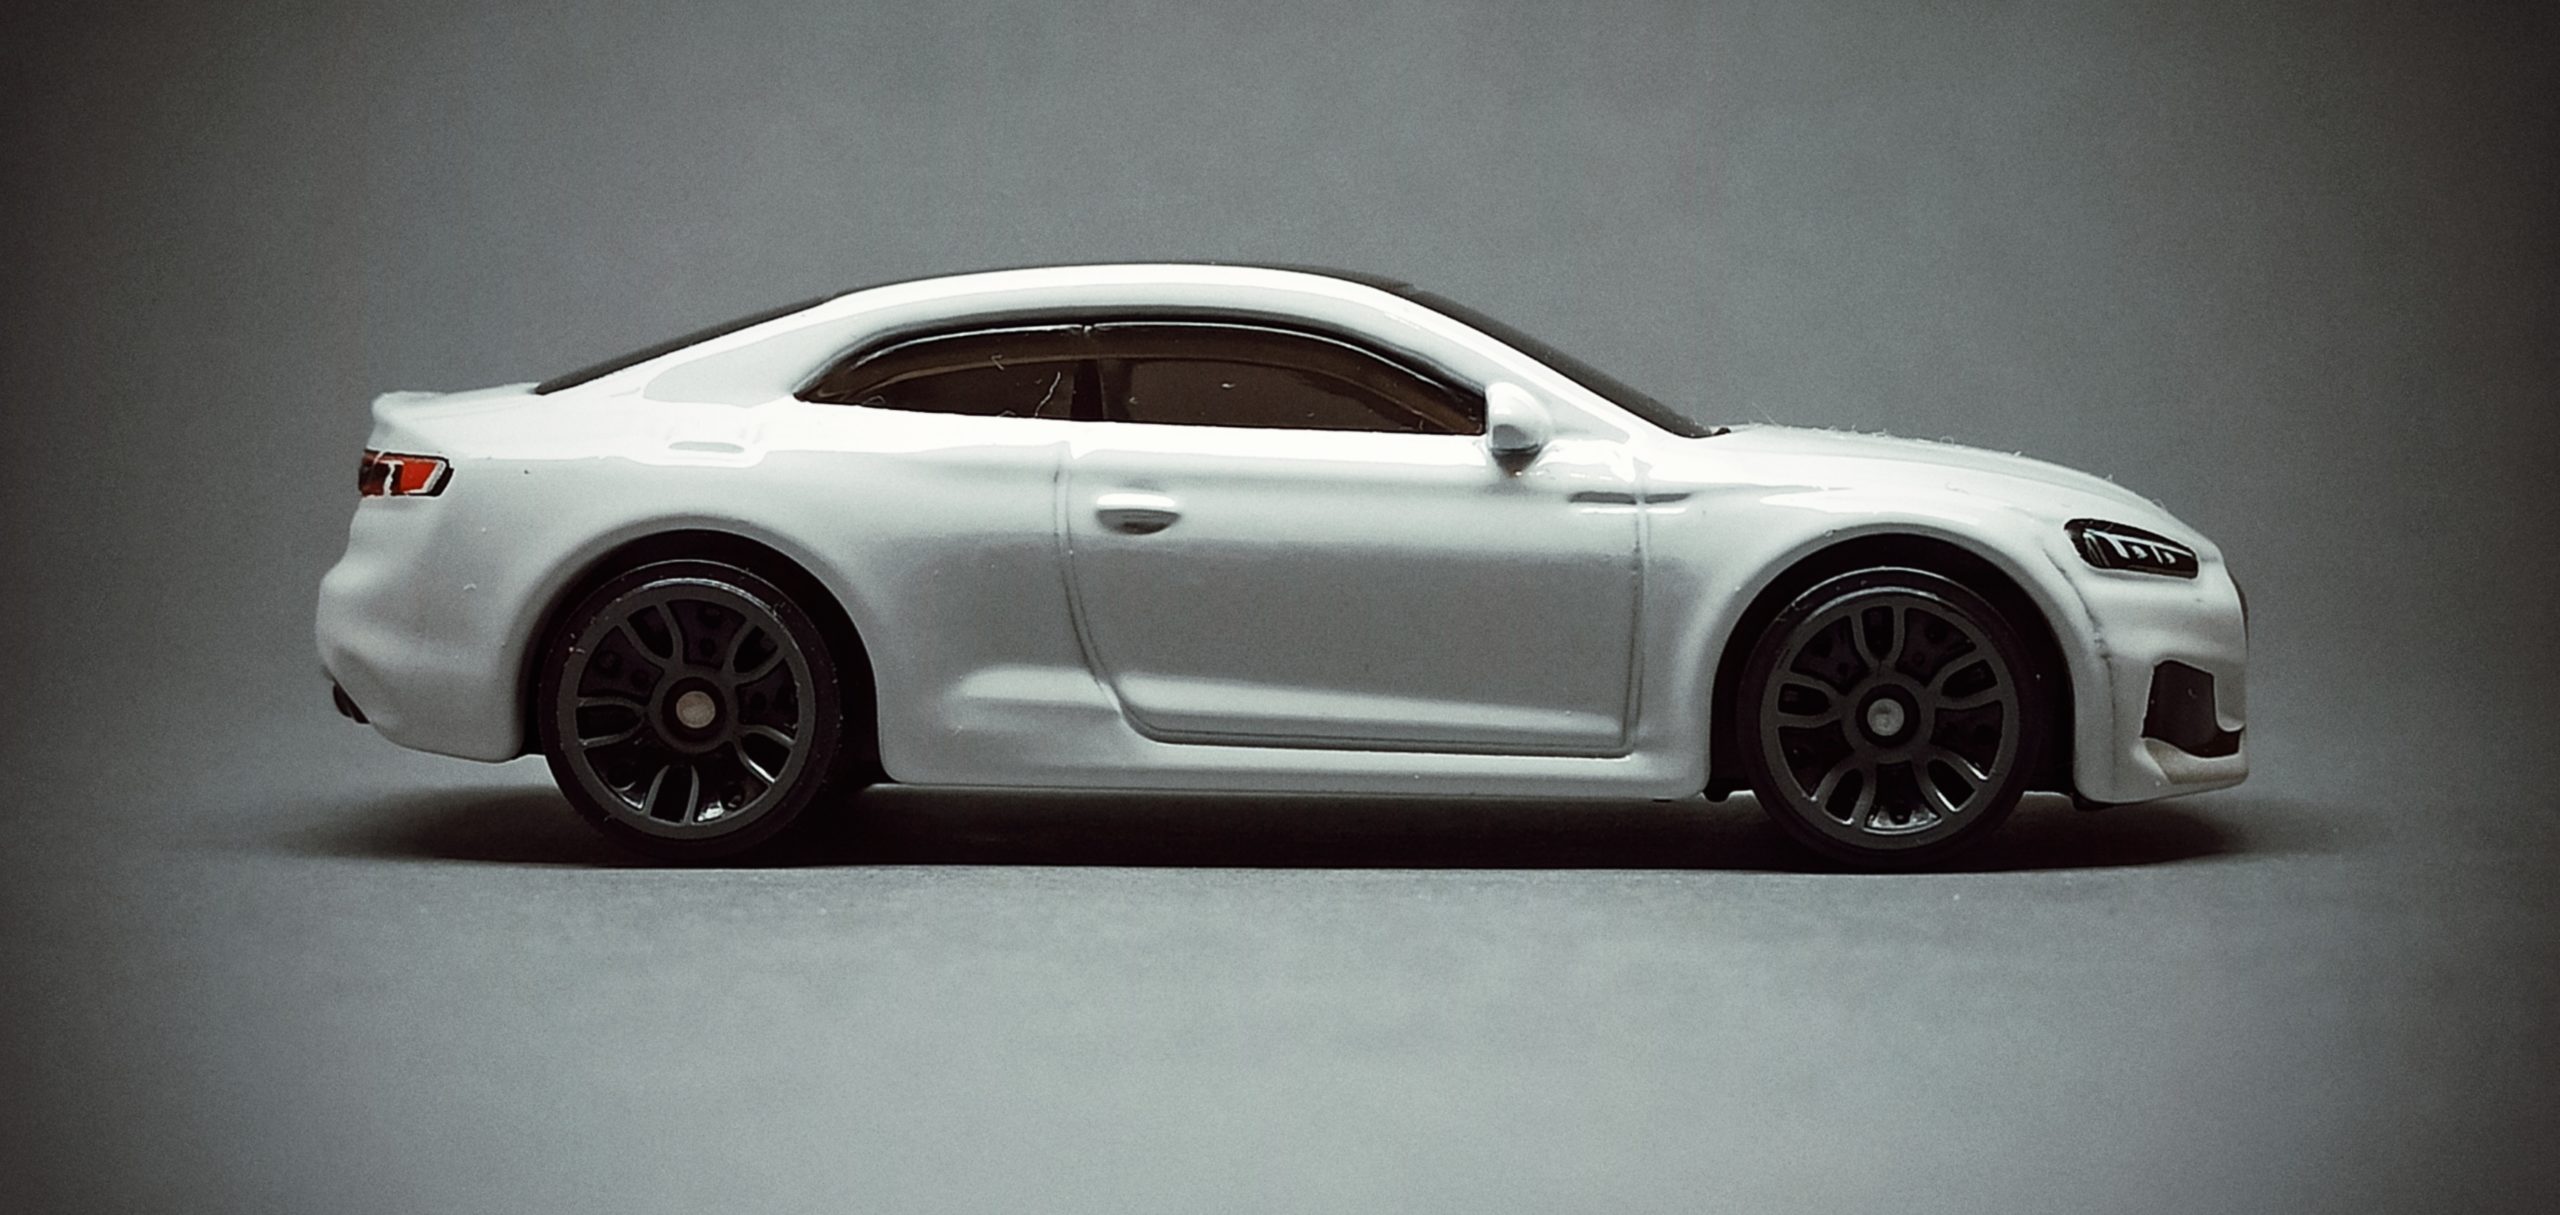 Hot Wheels Audi RS 5 Coupé (X6999) 2021 Multipack Exclusive white